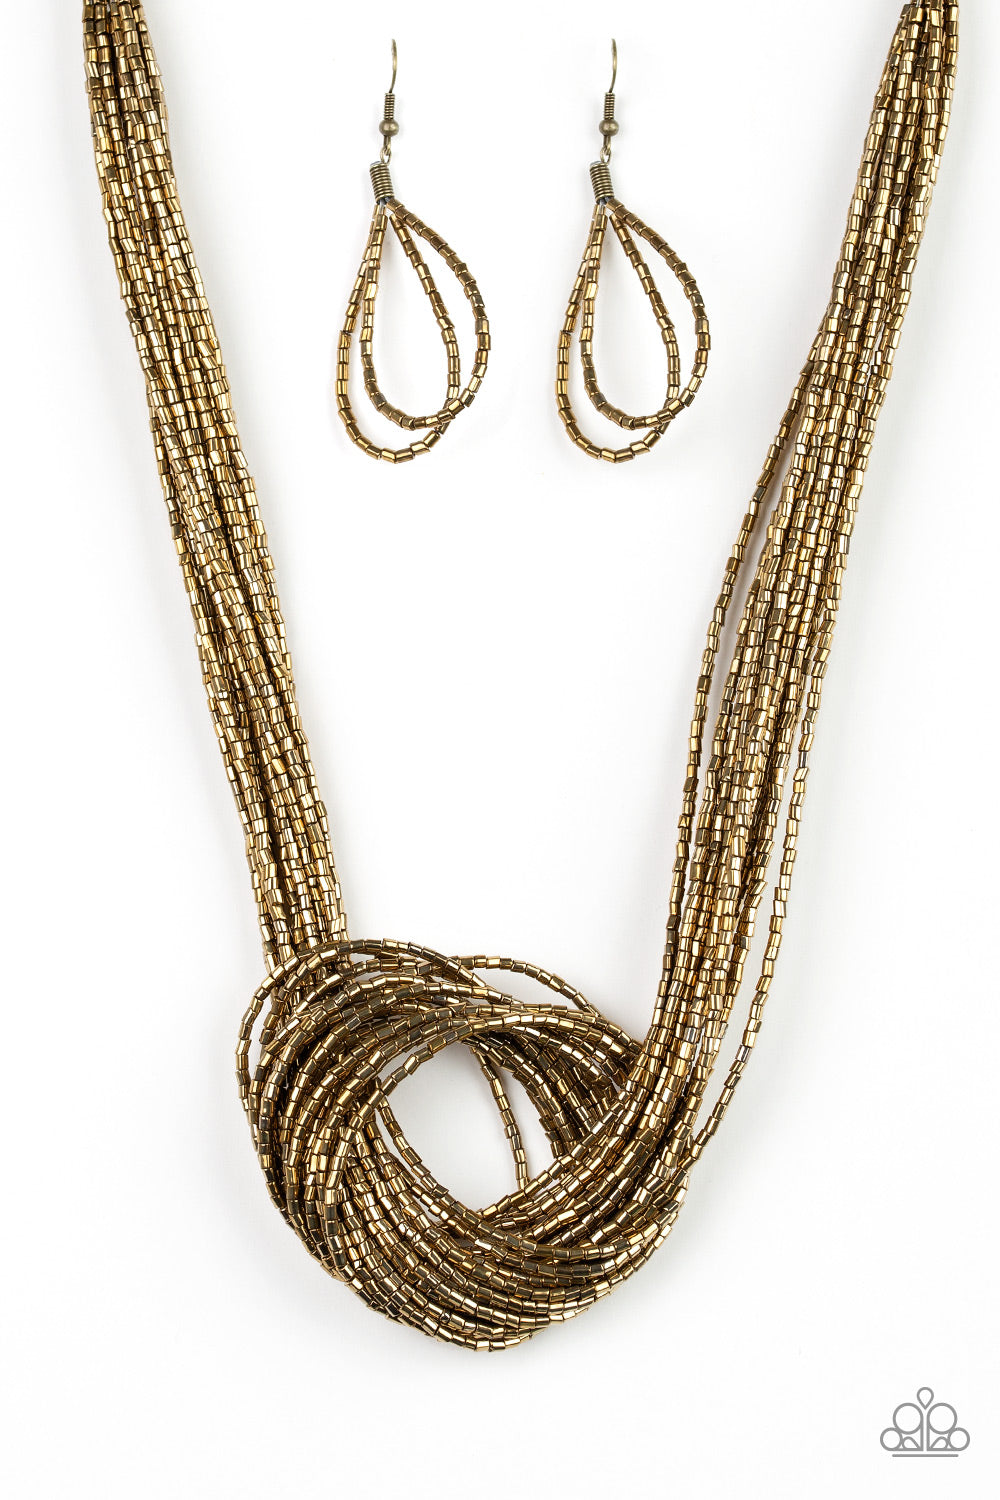 Knotted Knockout - Brass Seed Bead Necklace - Paparazzi Accessories - Countless strands of brass seed beads delicately knot together below the collar to create an unforgettable statement piece. Features an adjustable clasp closure. Sold as one individual necklace. Includes one pair of matching earrings.